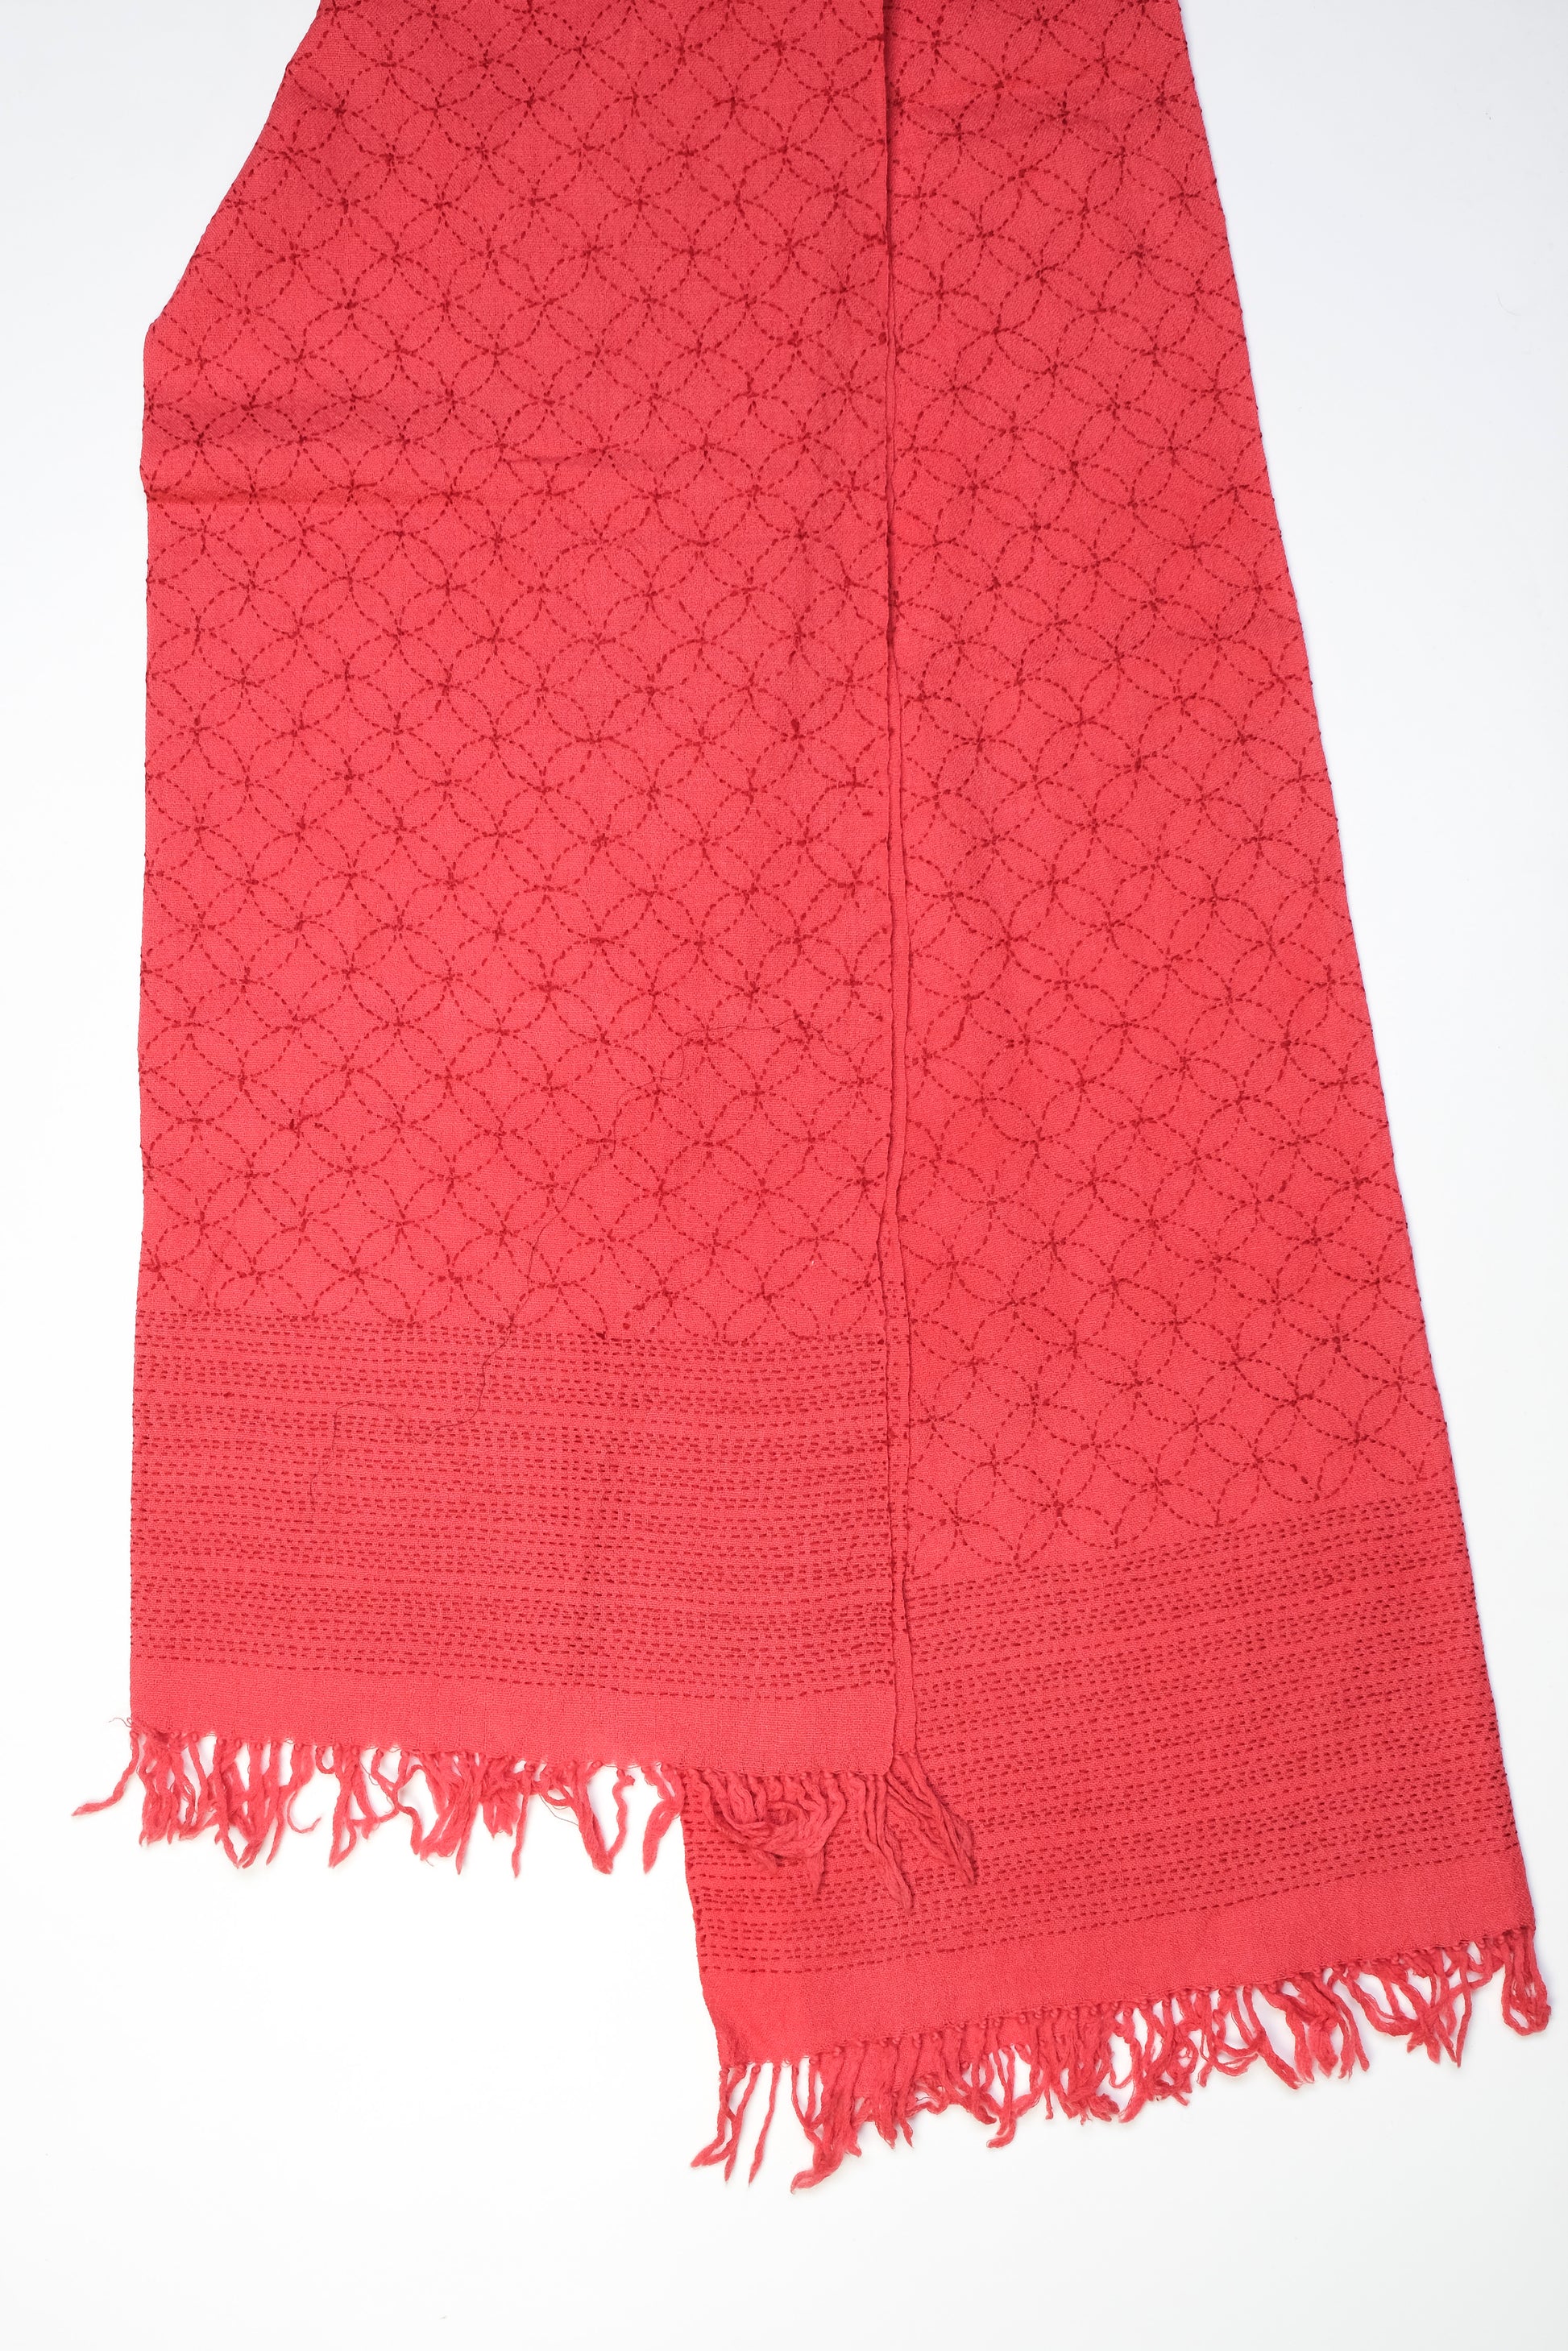 Handwoven Embroidered Pure Pashmina  Shawl